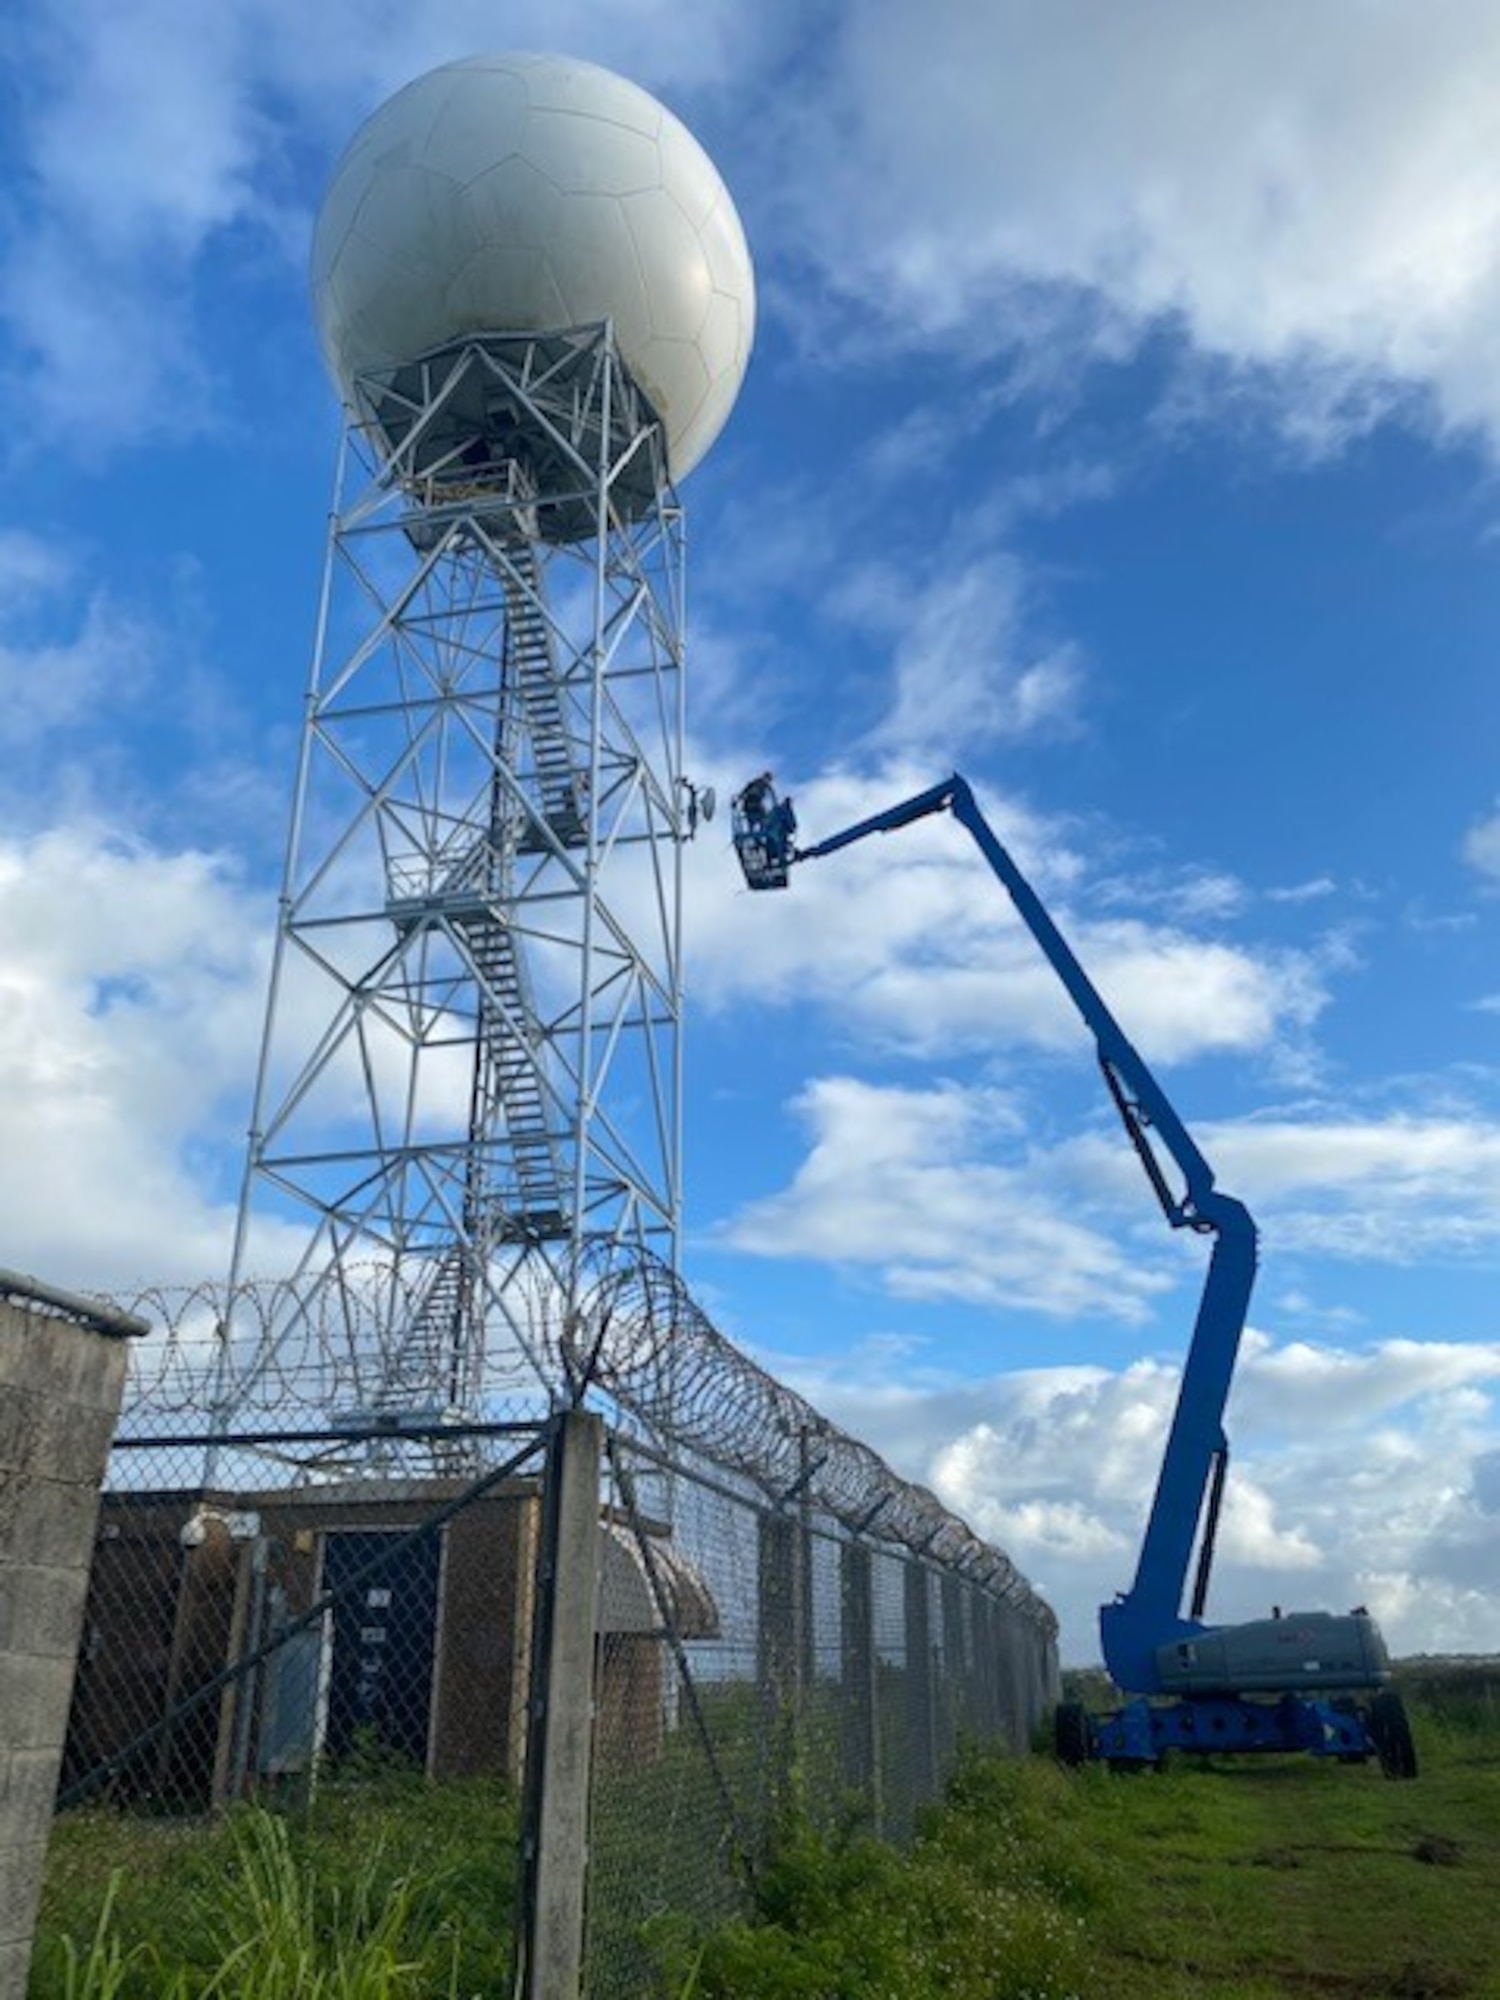 Members of the 36th Operation Support Squadron Radar, Airfield, & Weather Systems use a crane to repair the Next-Generation Radar, March 28, 2020 in Yigo, Guam. The waveguide is a 100-foot tube of pressurized air, which allows signals to pass between the station below and the radar above.  (U.S. Air Force photo by Staff Sgt. Matthew Hawkins)